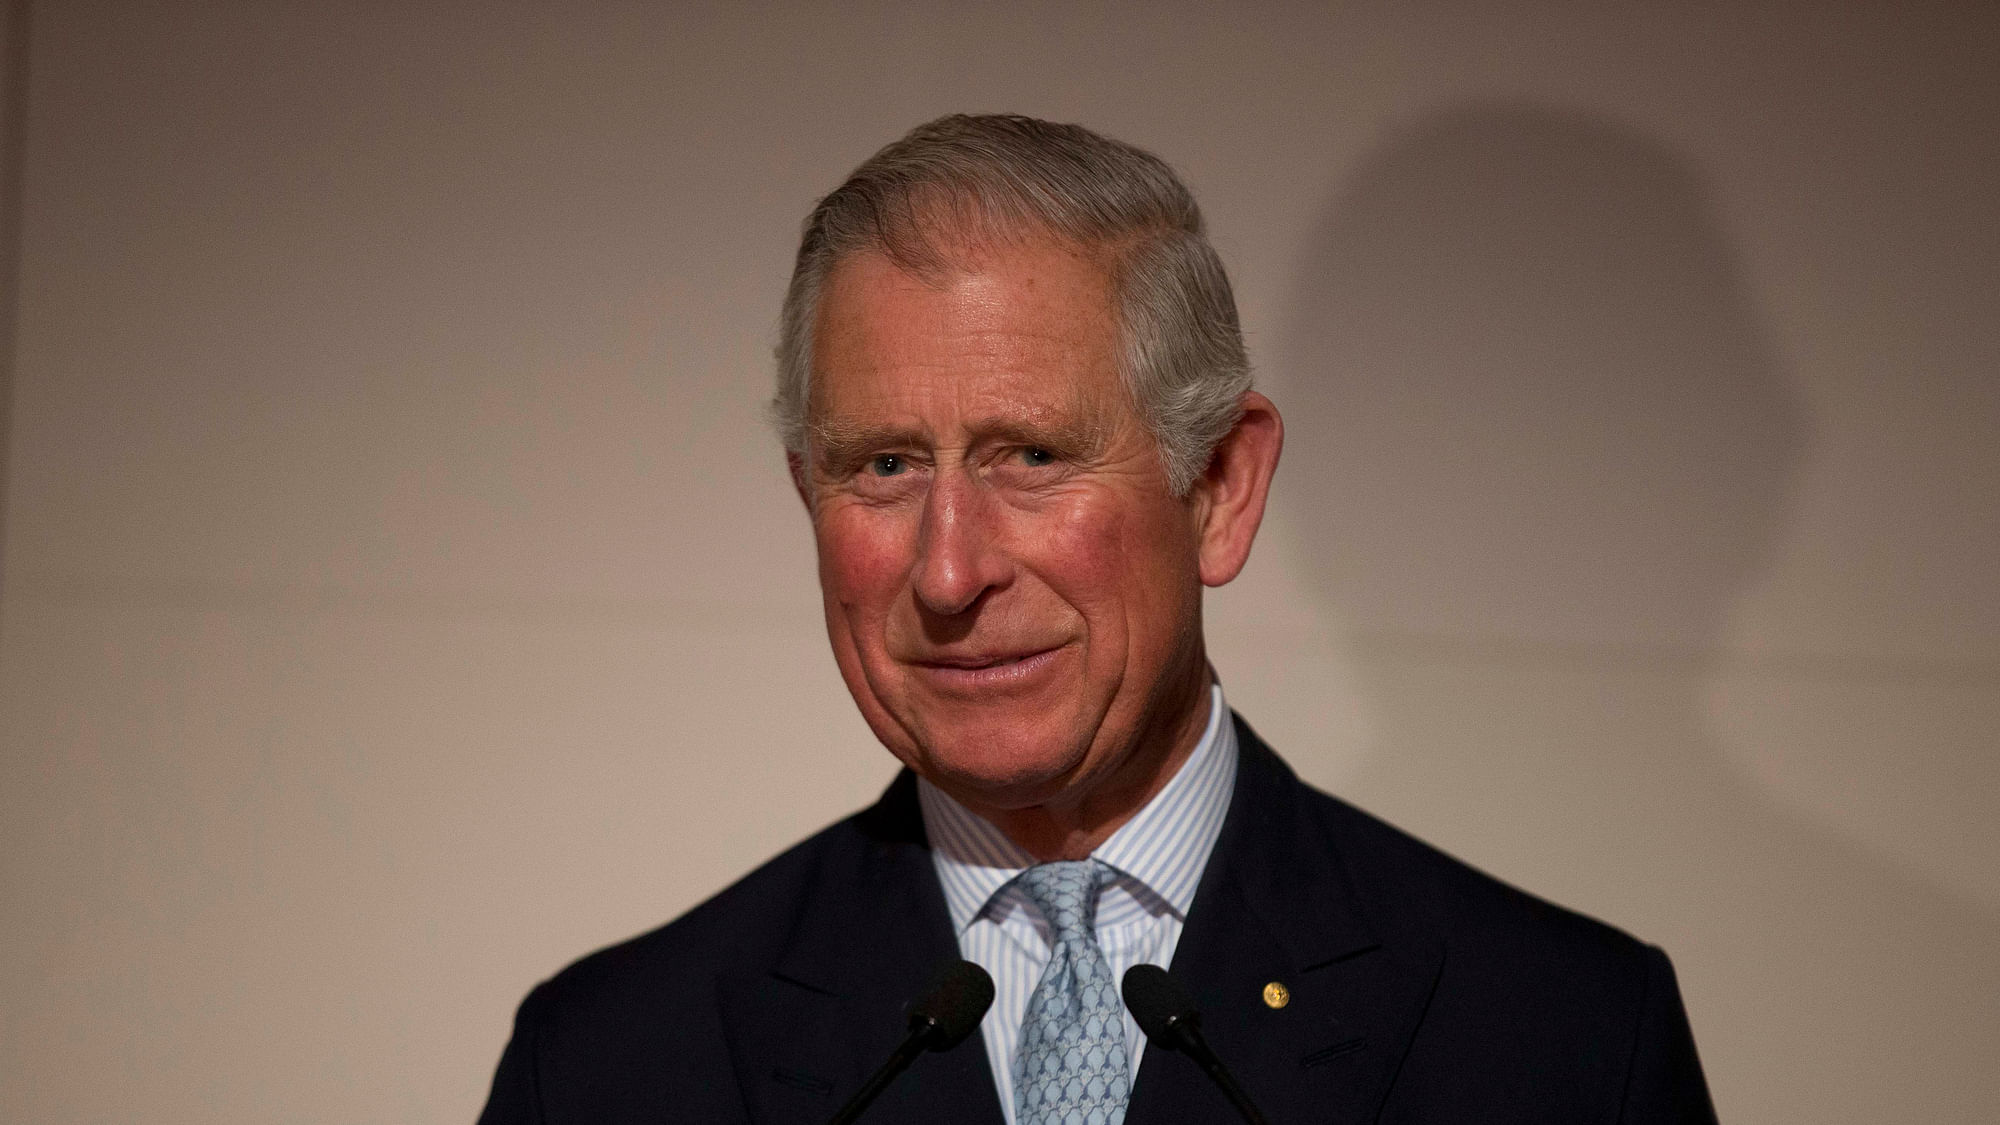 Britain’s Prince Charles makes a speech as he visits the “Indigenous Australia: Enduring Civilisation” exhibition at the British Museum in London, Thursday, April 30, 2015.&nbsp;